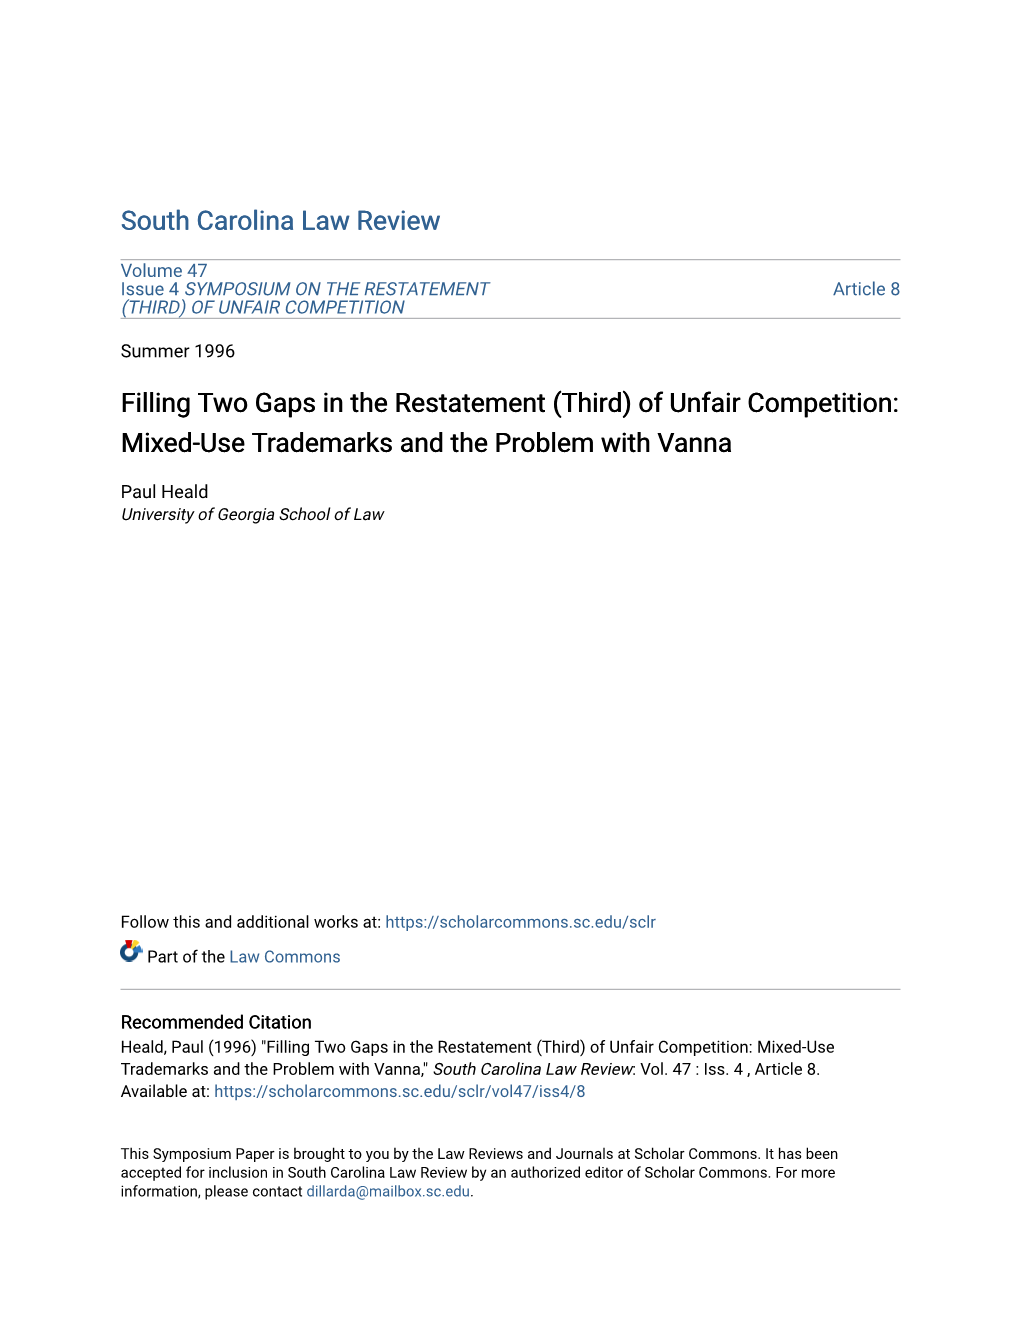 Filling Two Gaps in the Restatement (Third) of Unfair Competition: Mixed-Use Trademarks and the Problem with Vanna